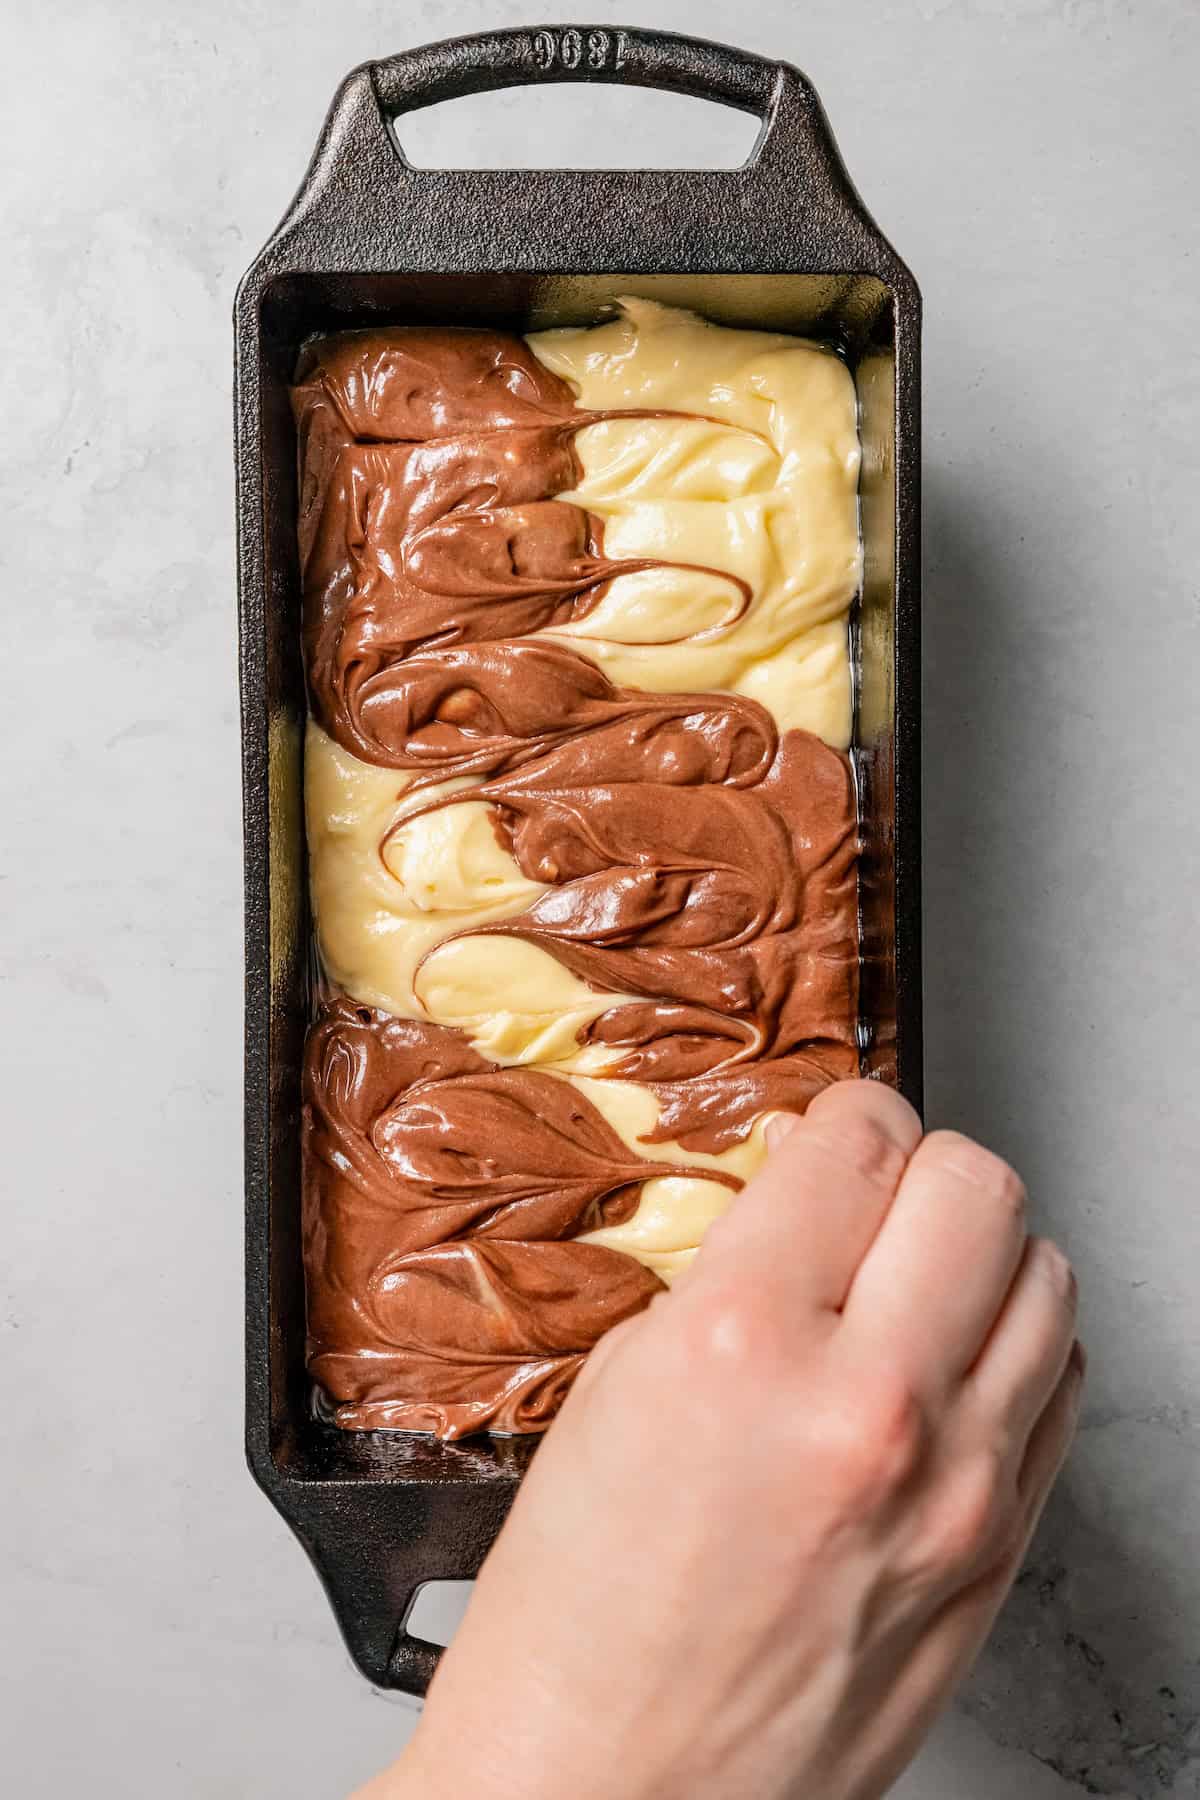 A hand uses a toothpick to swirl chocolate and vanilla cake batter together in a loaf pan.